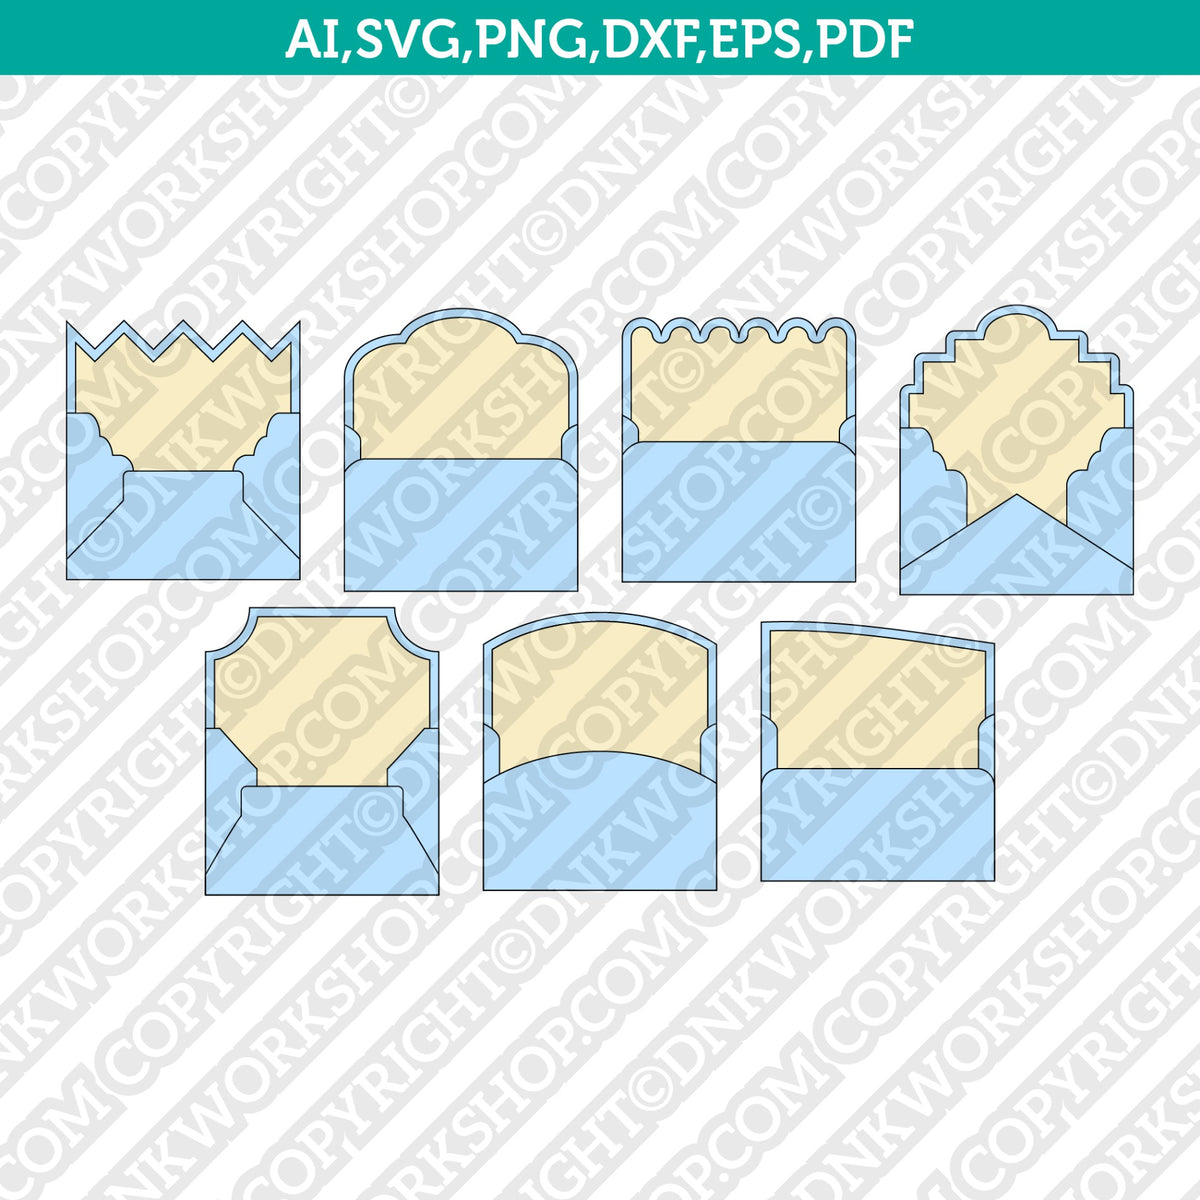 Envelope Template for 5x7,PNG and SVG, Dxf, Formats, A3 sheet, Printable